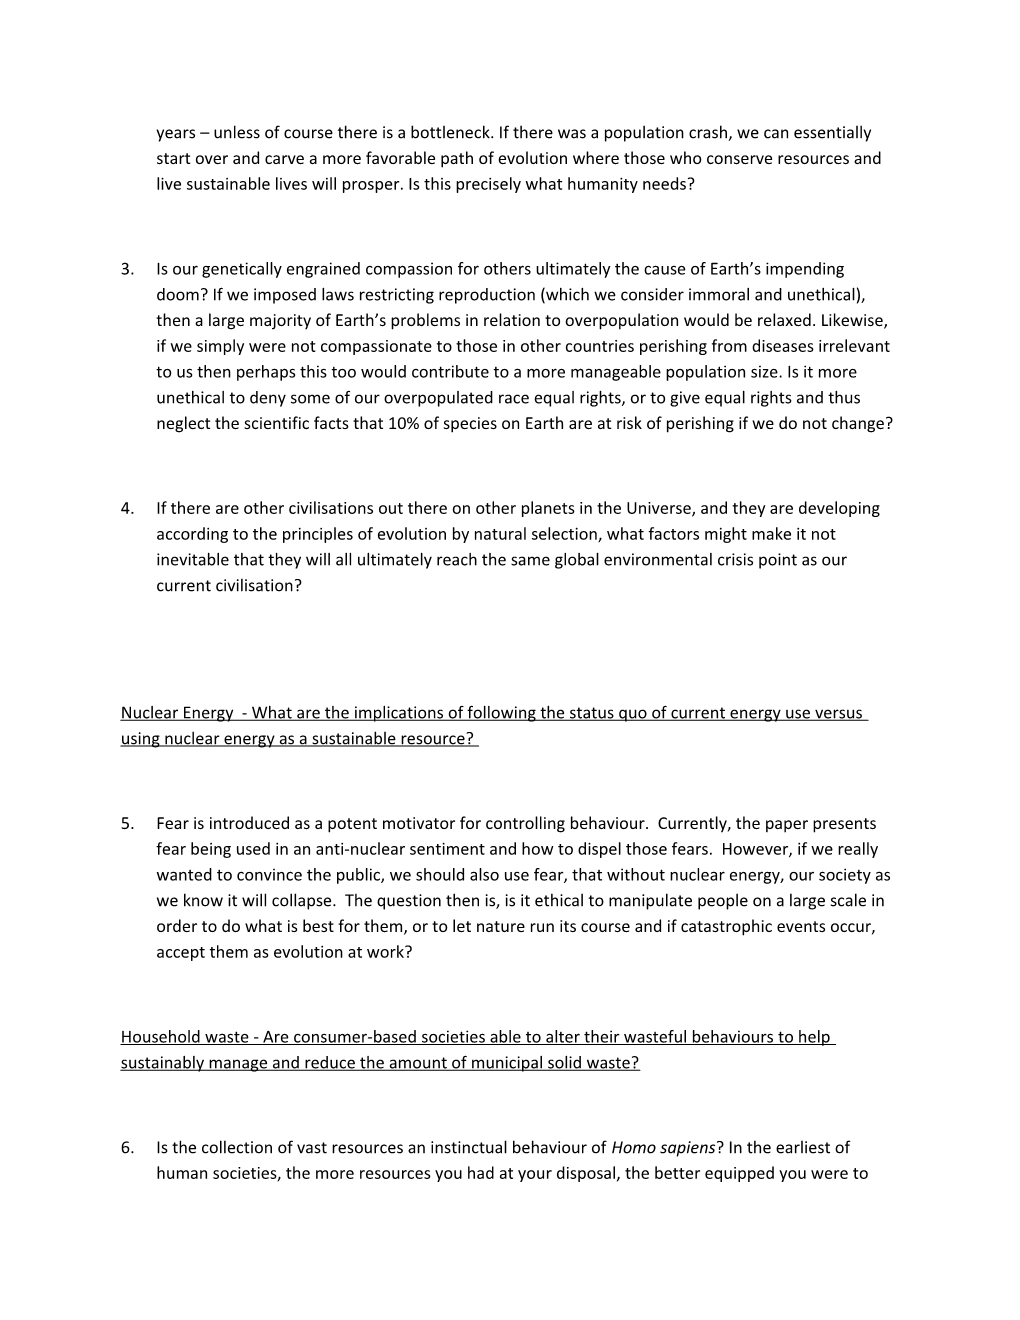 Guidelines for Developing Good Seminar Discussion Questions